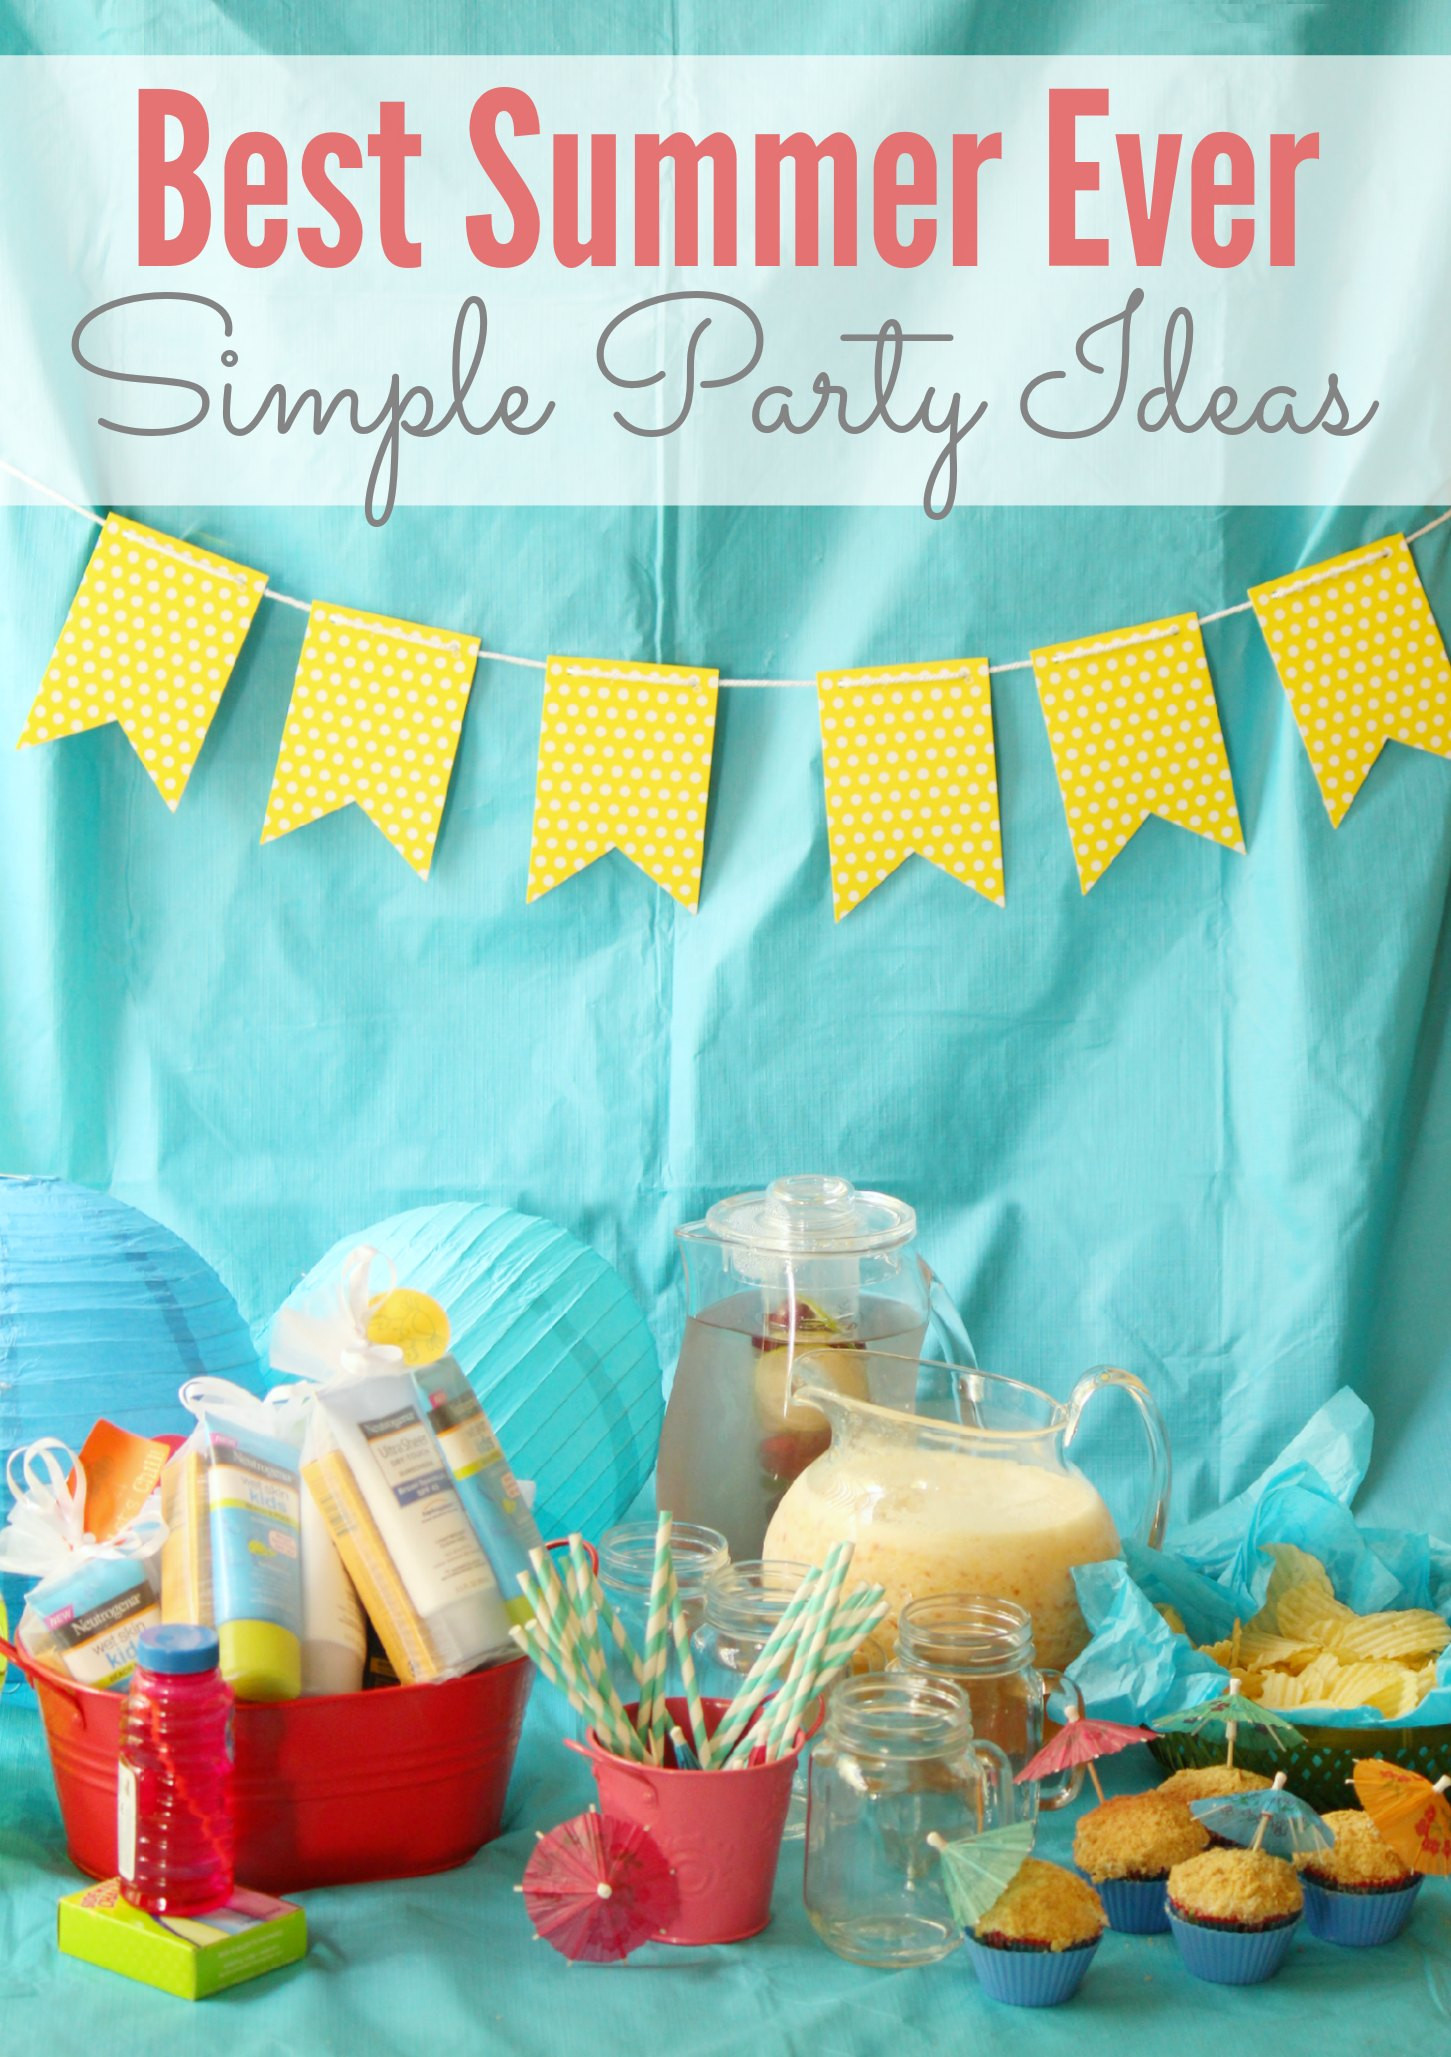 Party Theme Ideas For Summer
 Simple “Best Summer Ever” Party Ideas